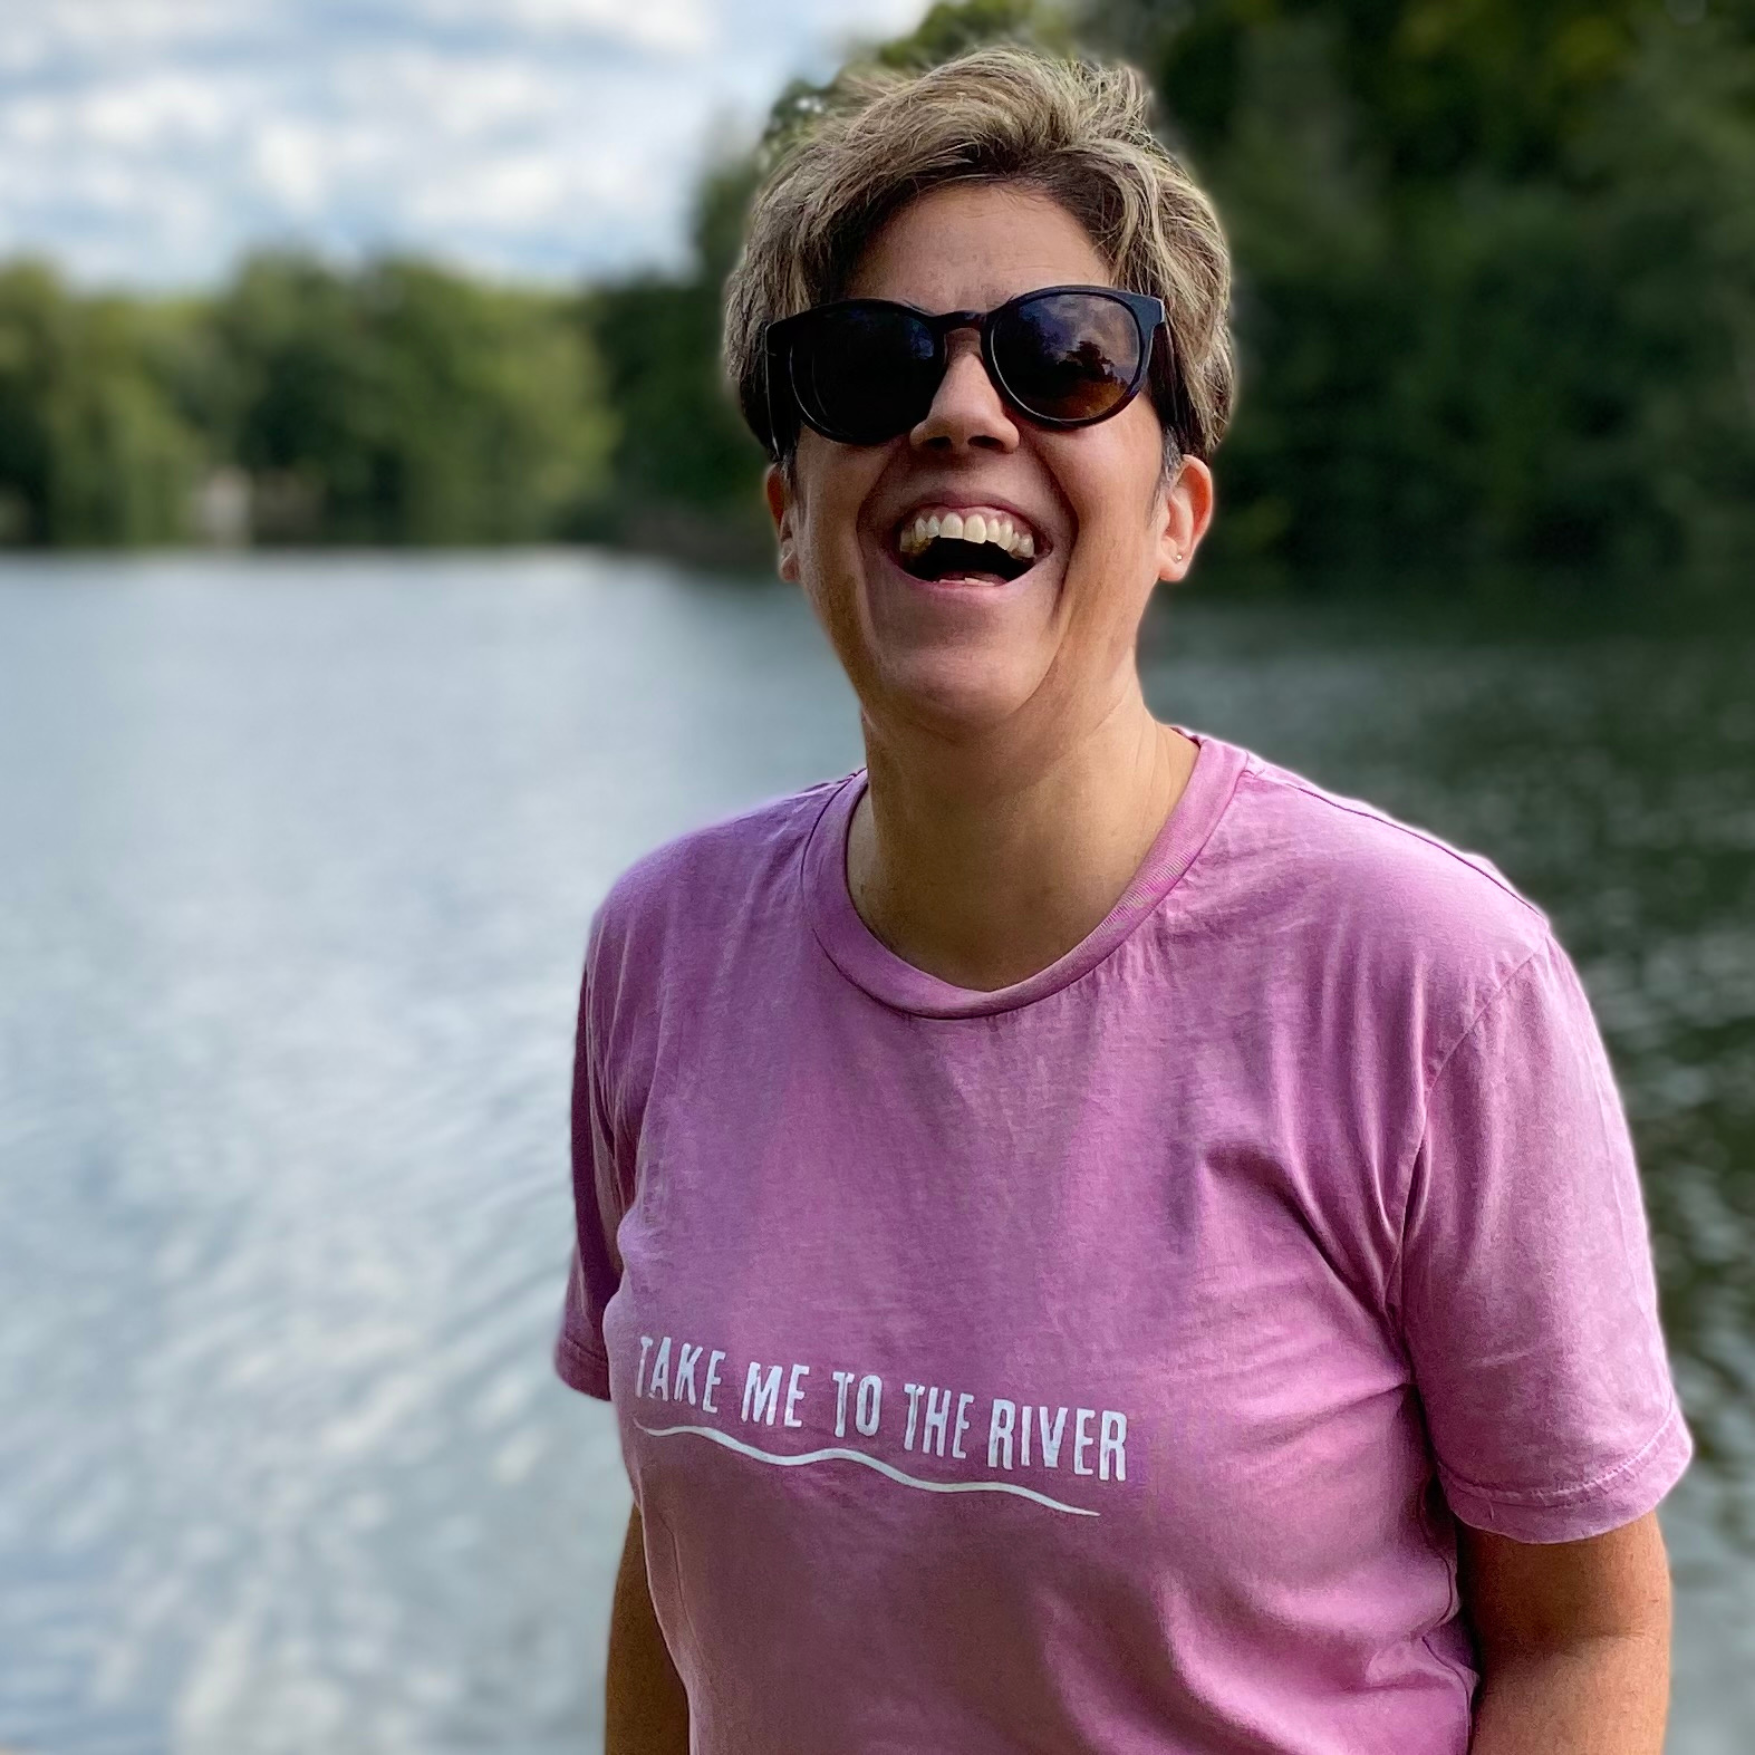 Woman stood by a river and wearing a pink t-shirt and sunglasses